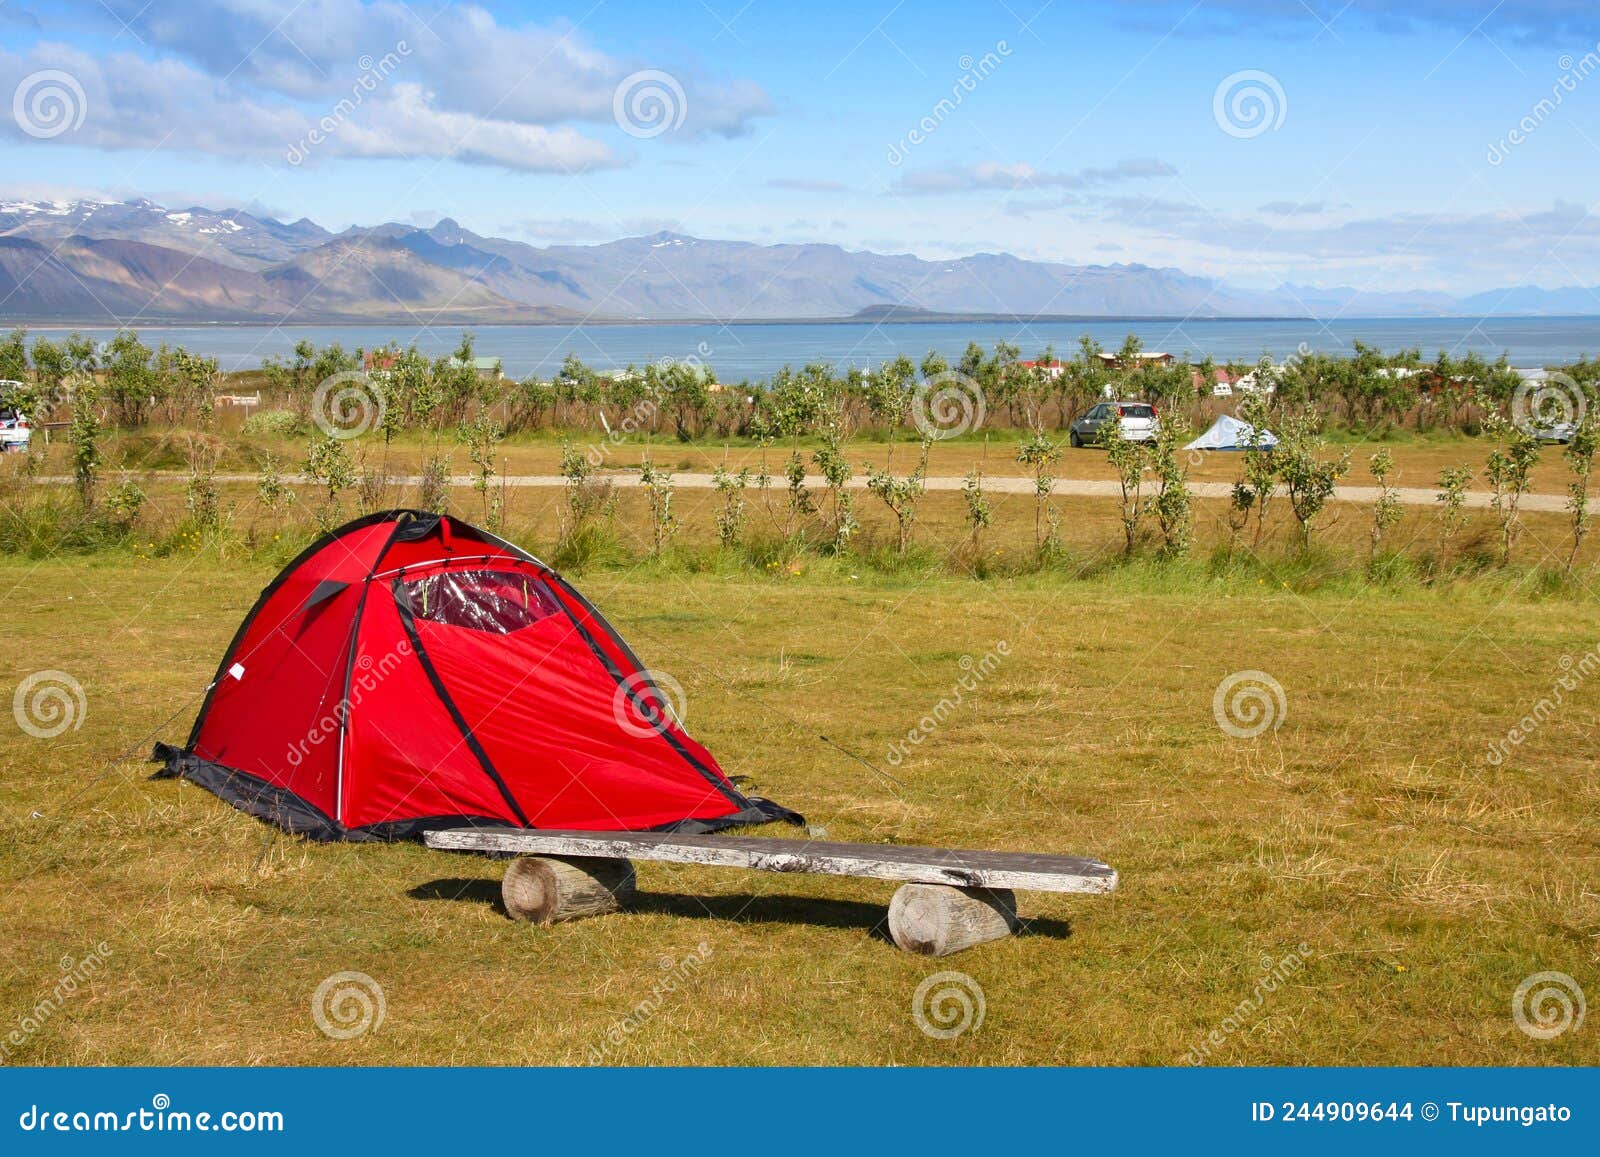 summer camping adventure in iceland